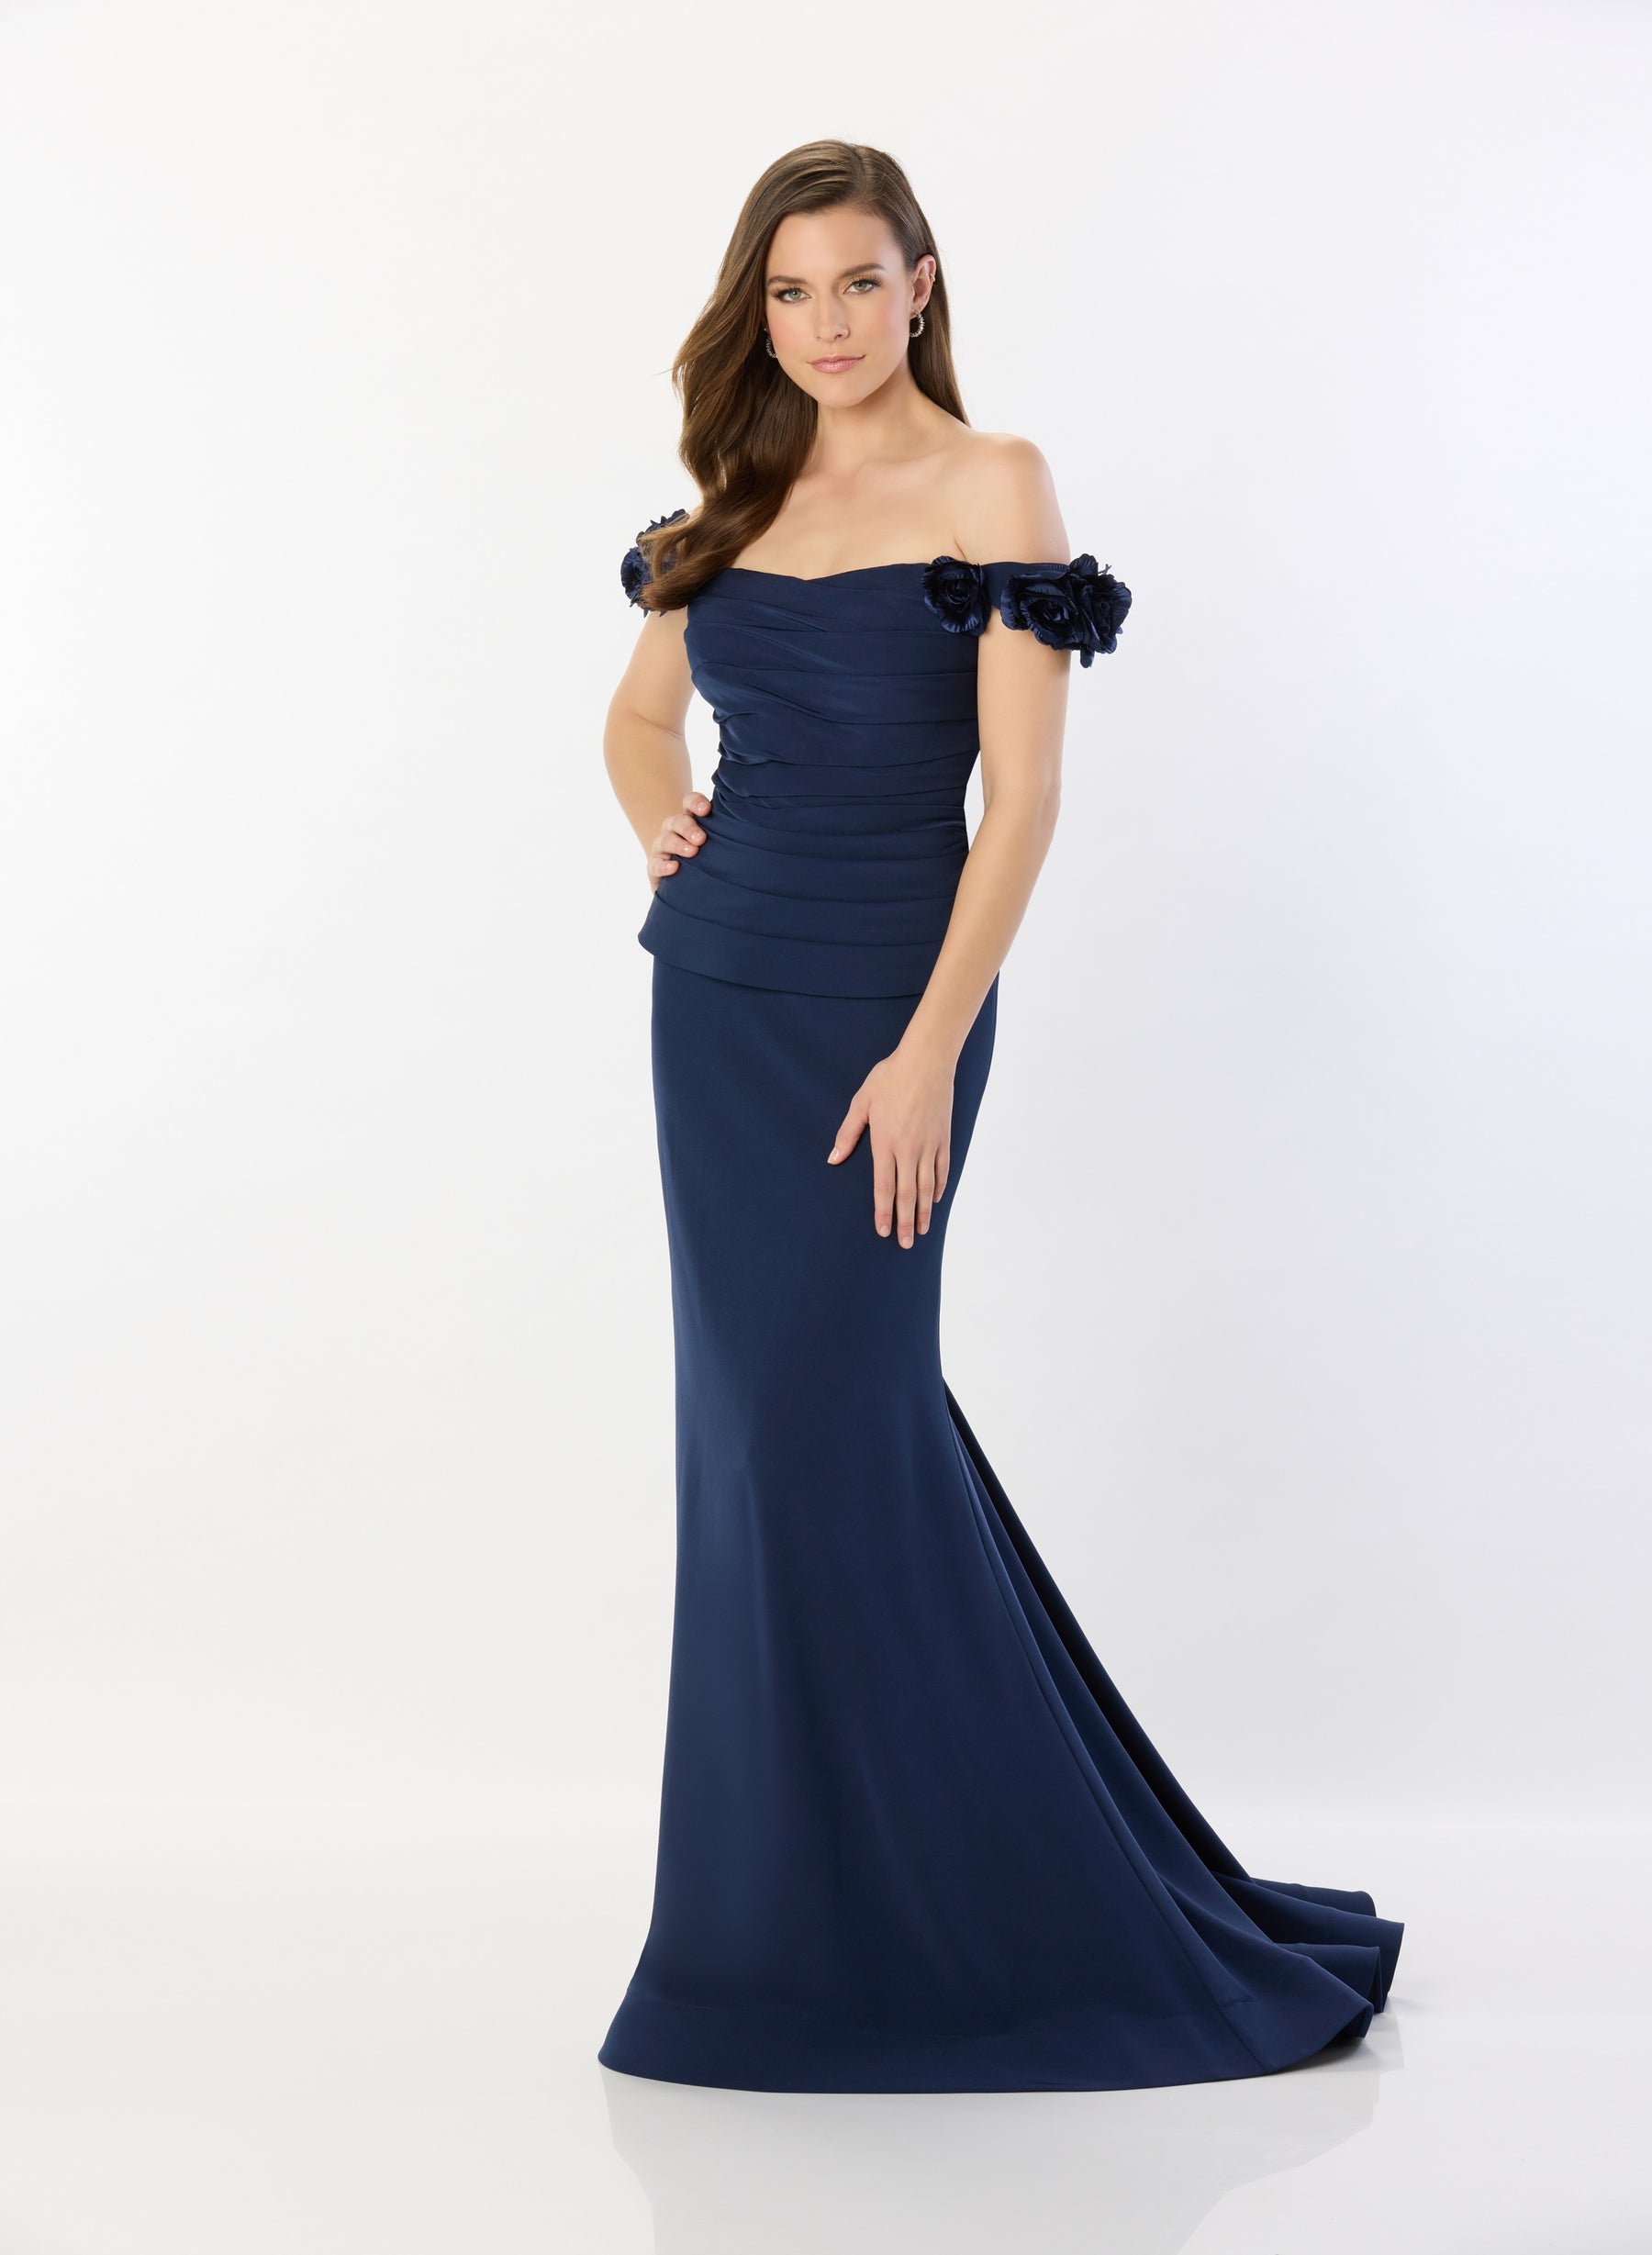 Off Shoulder Gown with Pleated Bodice and 3D Floral Accents